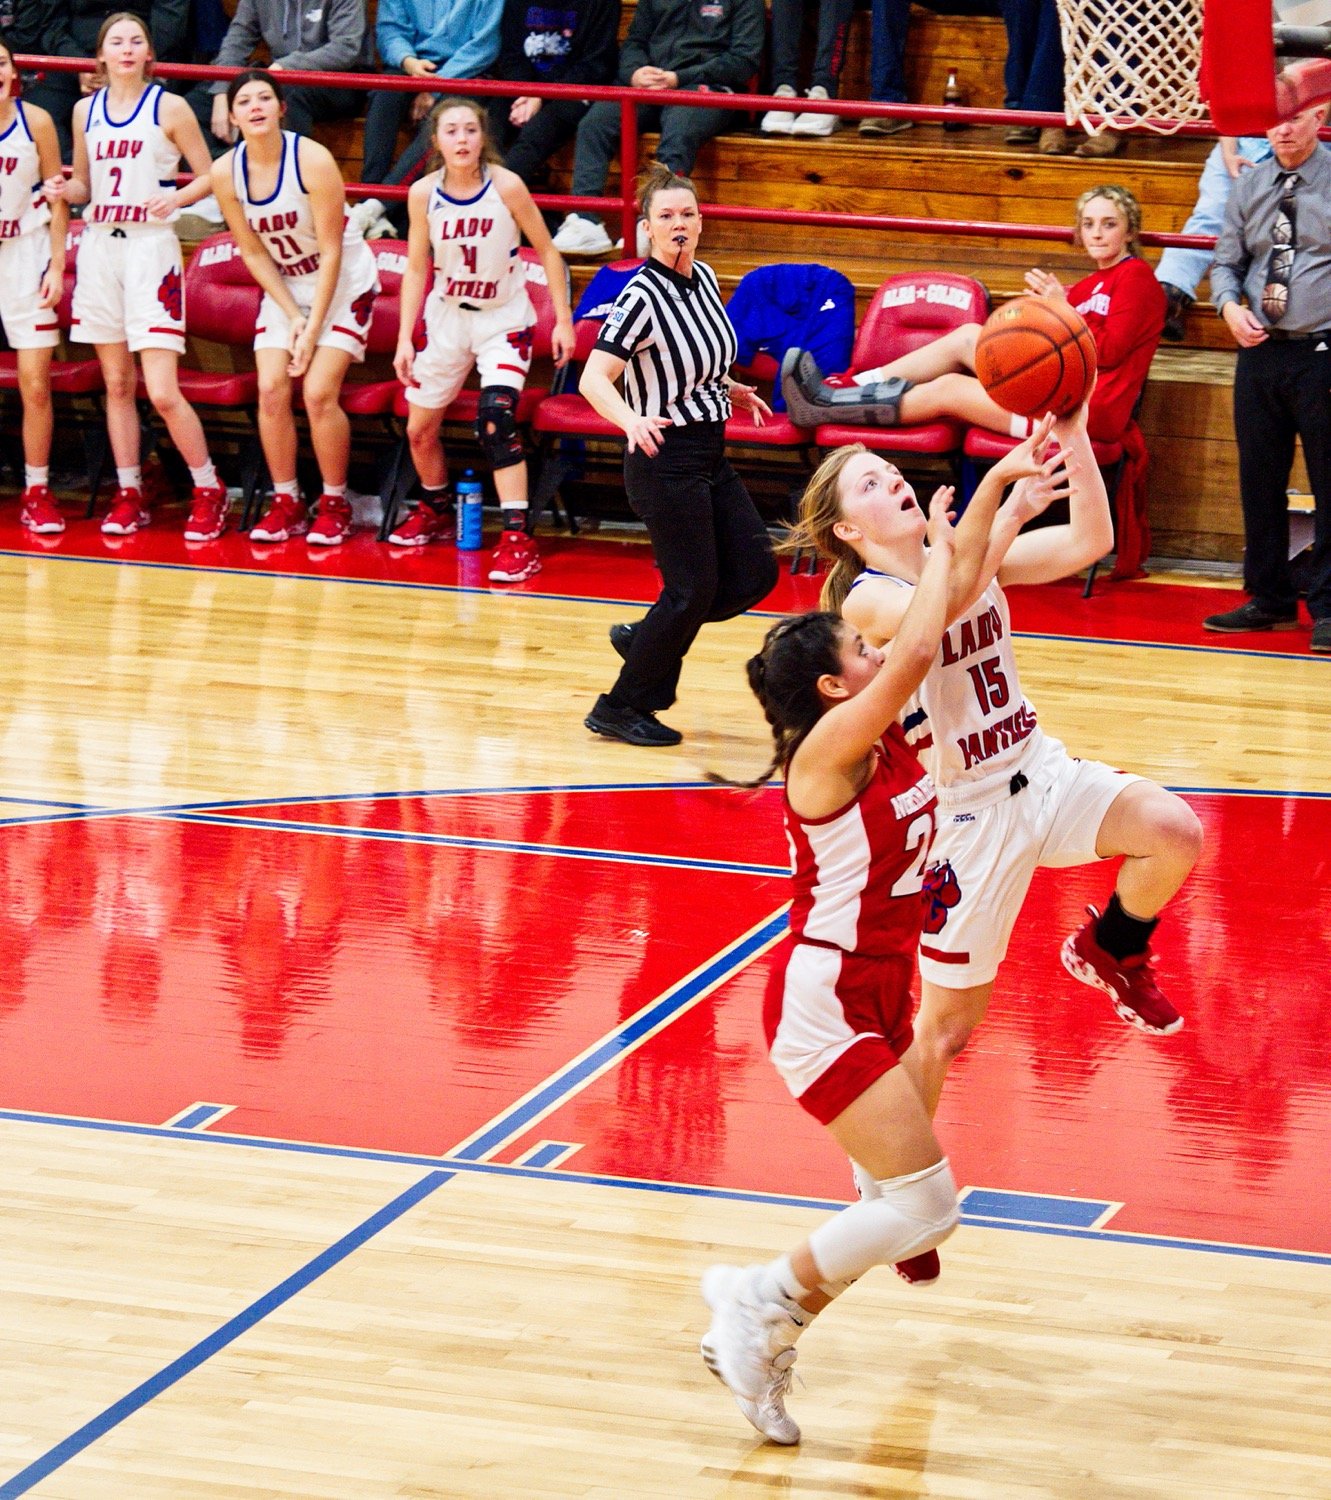 Cacie Lennon gets the bucket and the foul, which she would convert for a three-point play, claiming a two-point lead to close the third quarter. [more hoops highlights here]